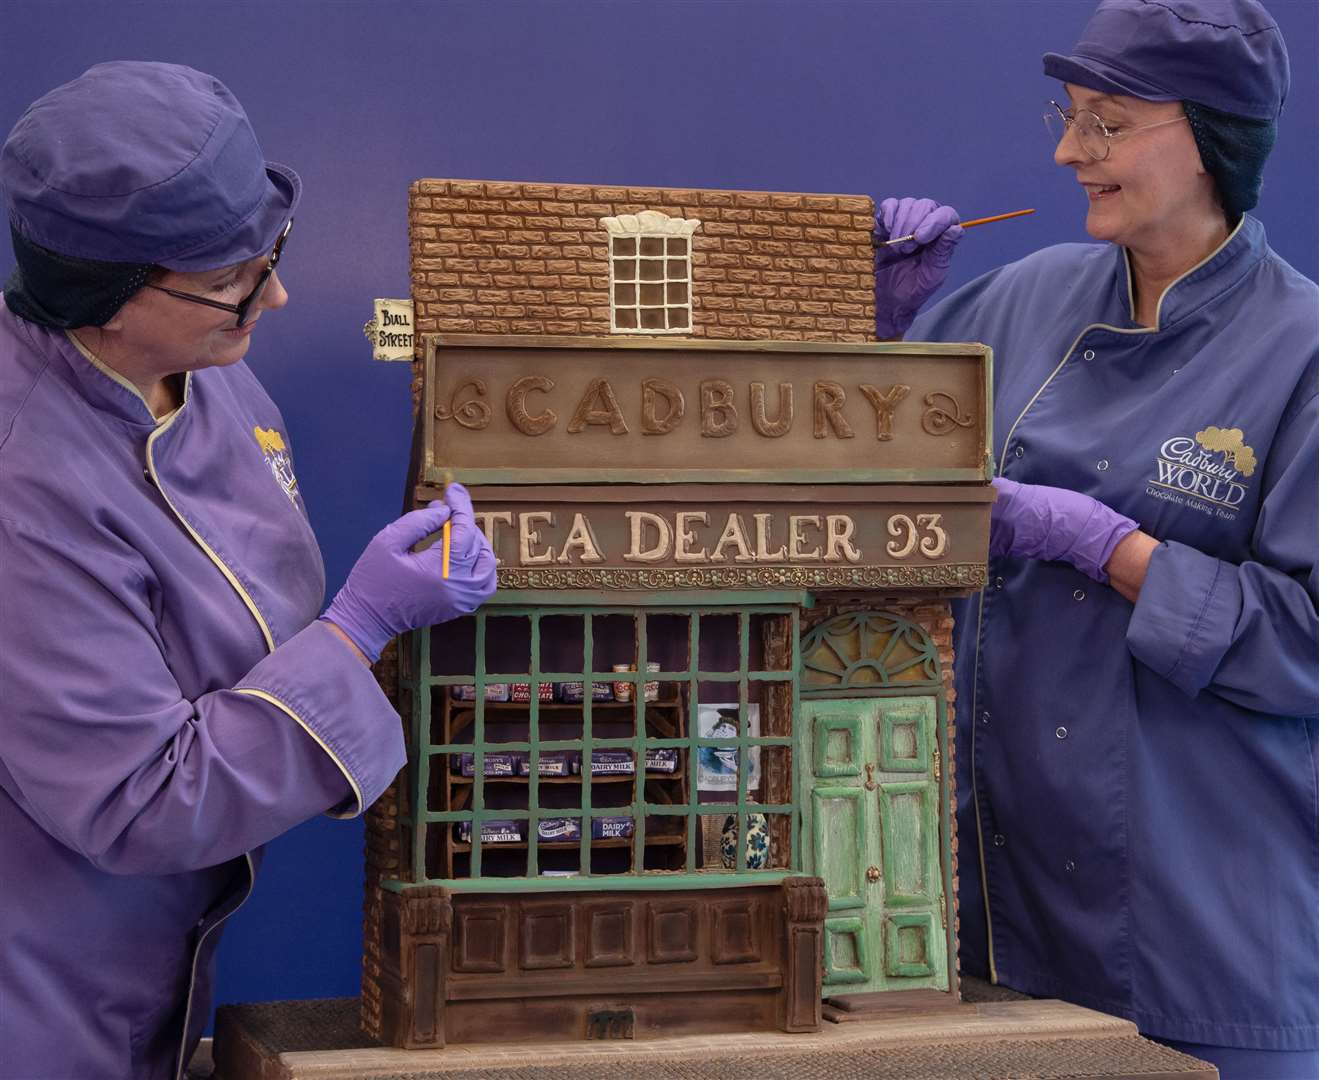 With 200 years of Cadbury this year, the Cadbury World attraction in Bournville, Birmingham is celebrating the history of Cadbury and commemorating where it all began (Cadbury World/PA)